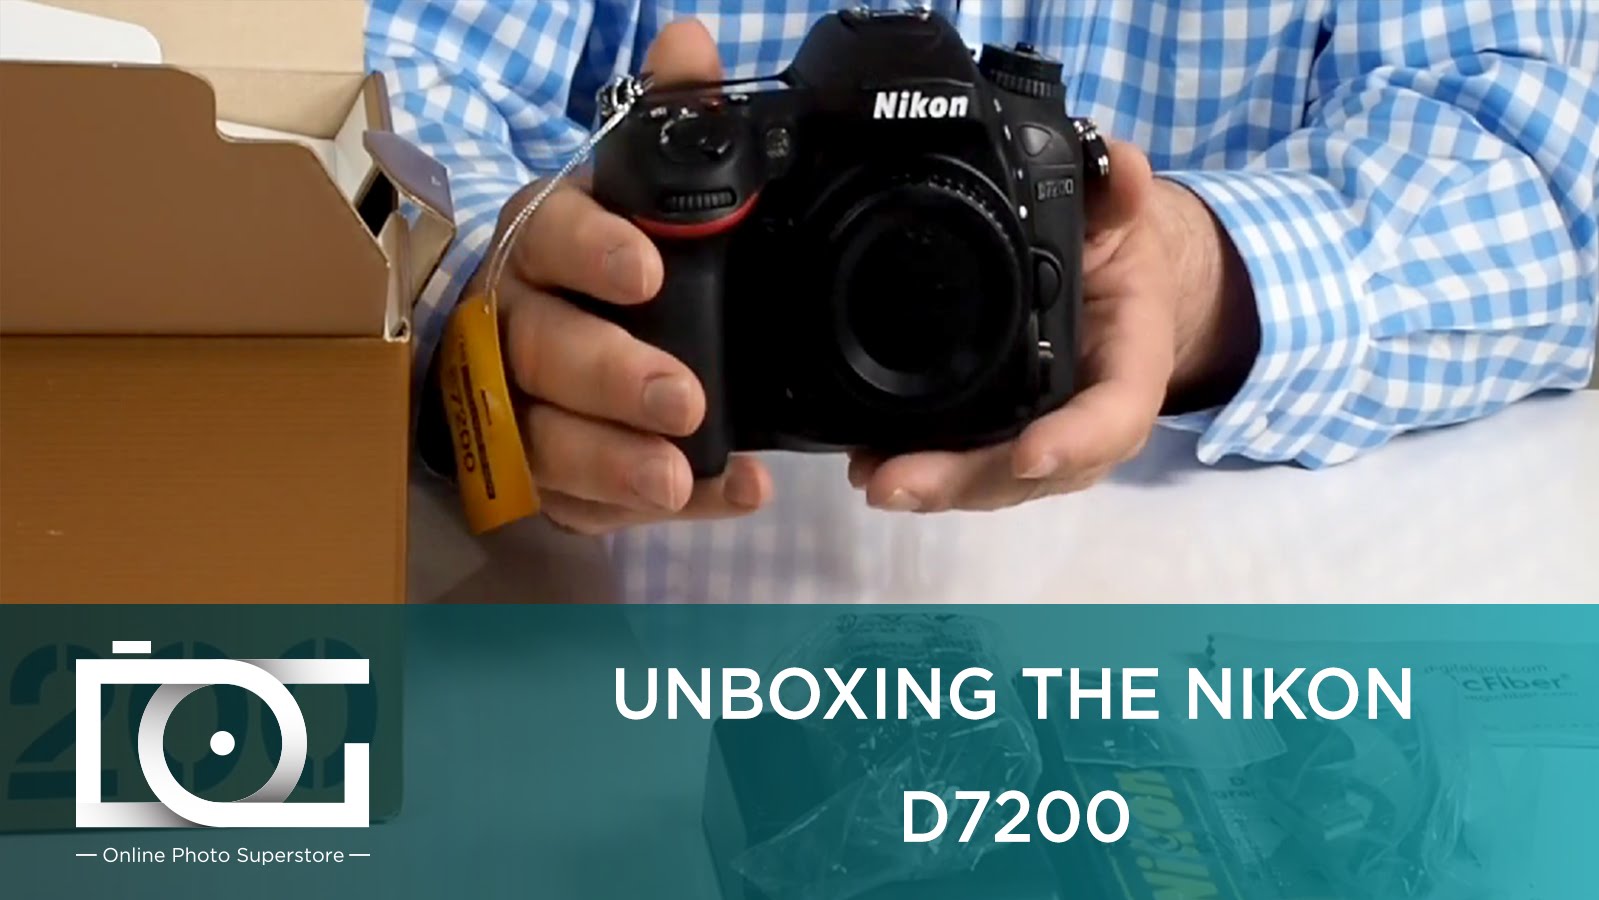 Nikon D7200 DSLR Camera w24 MP, WiFi, 51 Focusing Points, NFC Feature for Android & More Unboxing